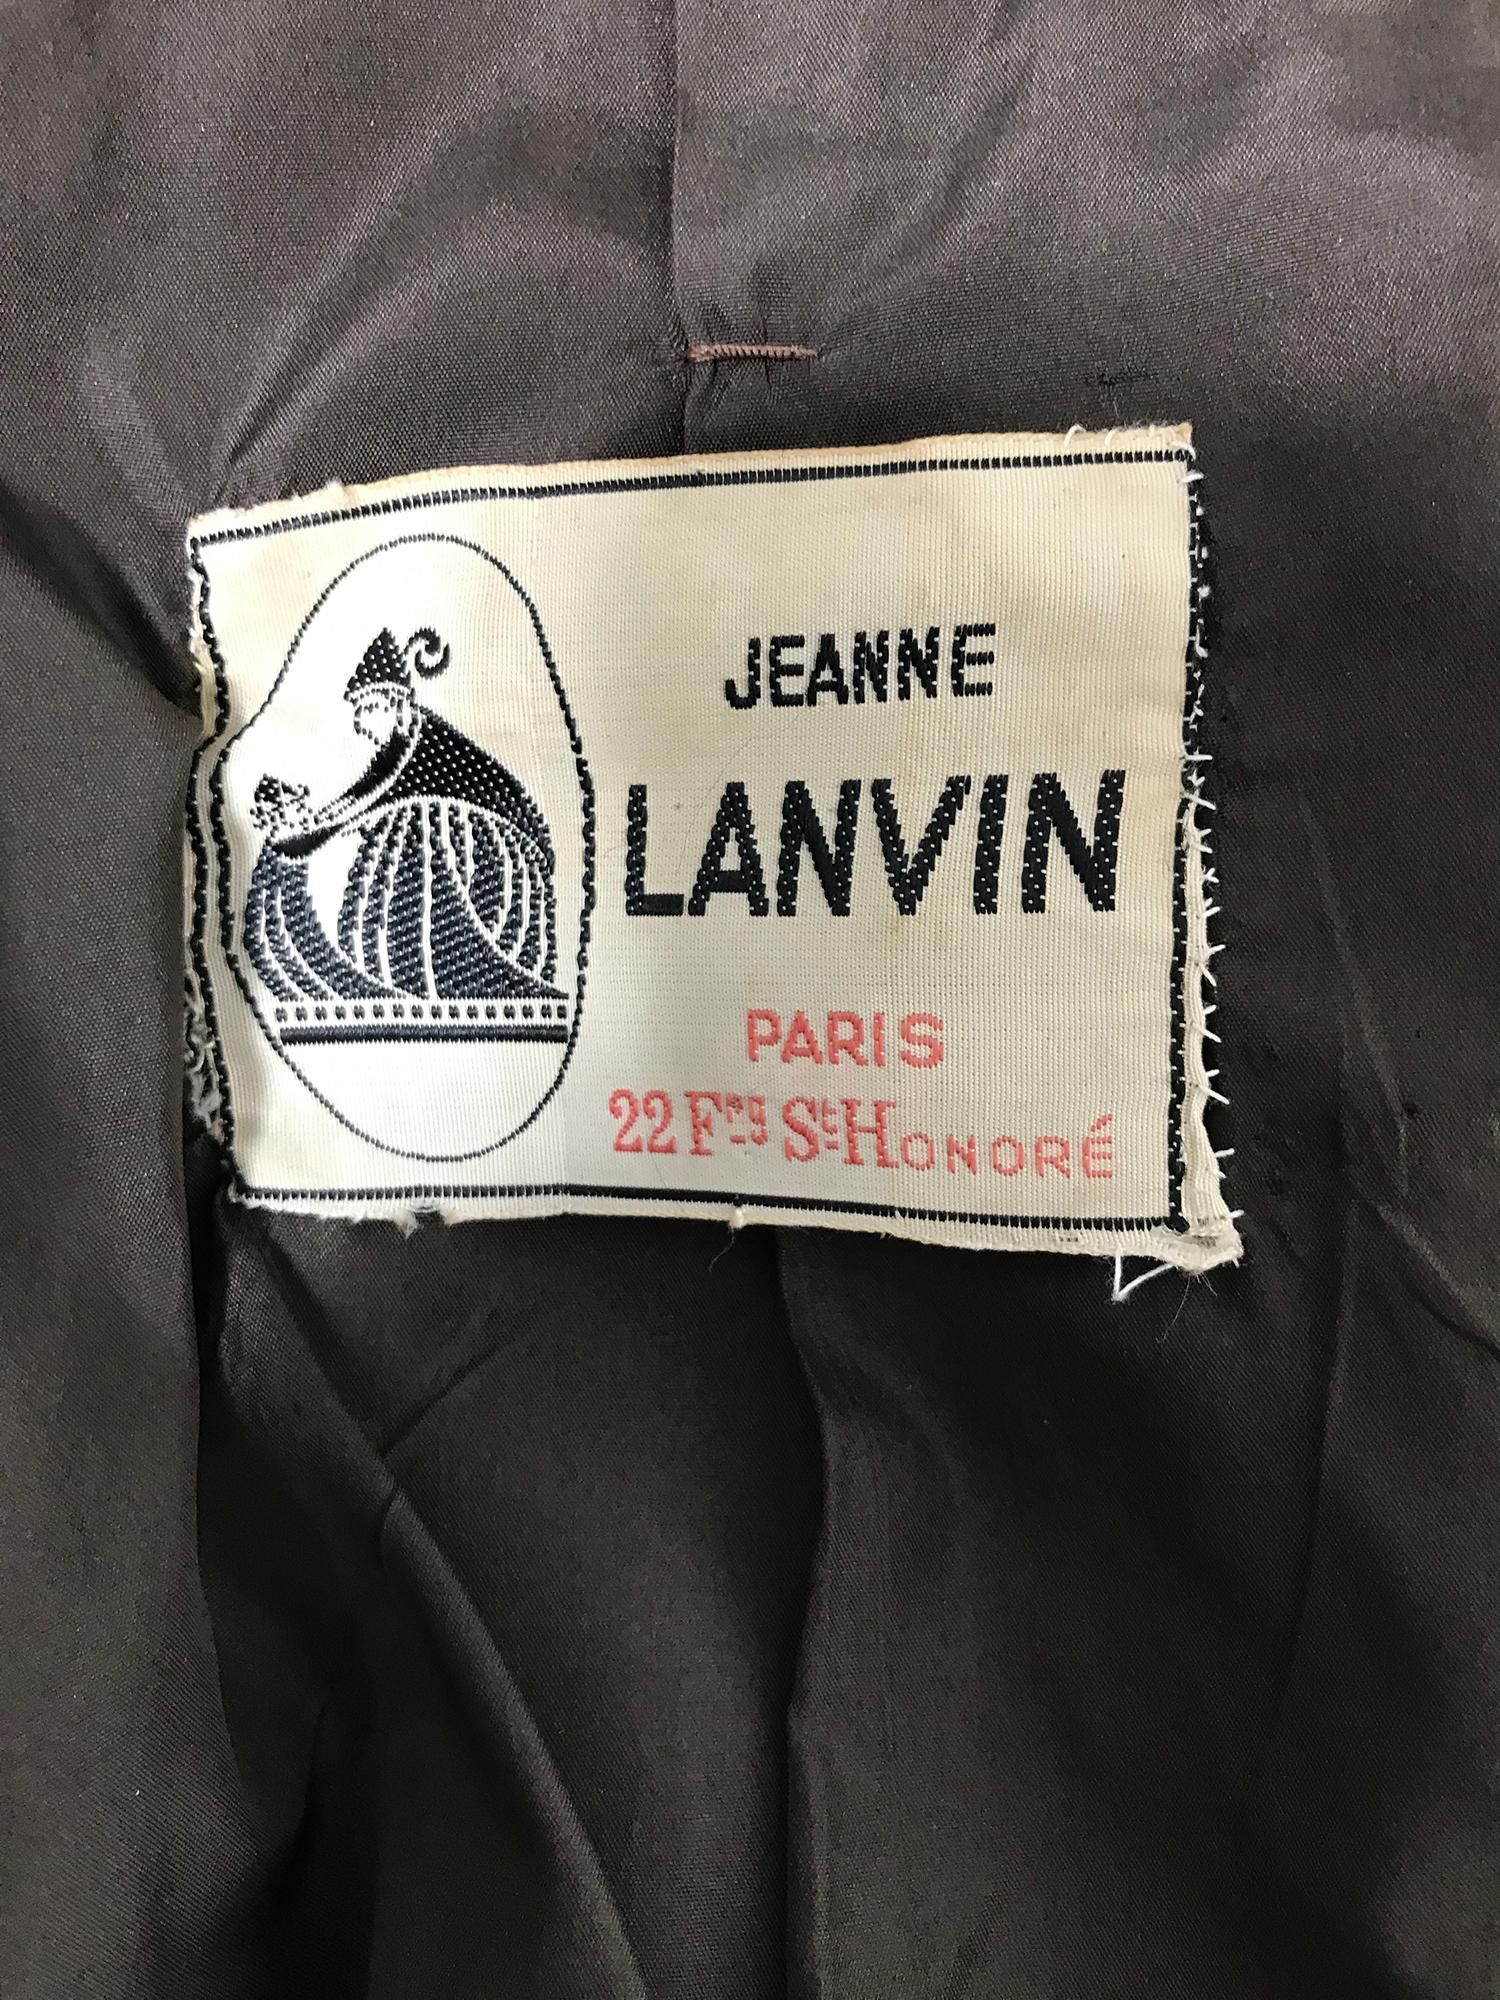 Jeanne Lanvin Numbered Couture Early 1960s Blue Tweed Skirt Suit  For Sale 5